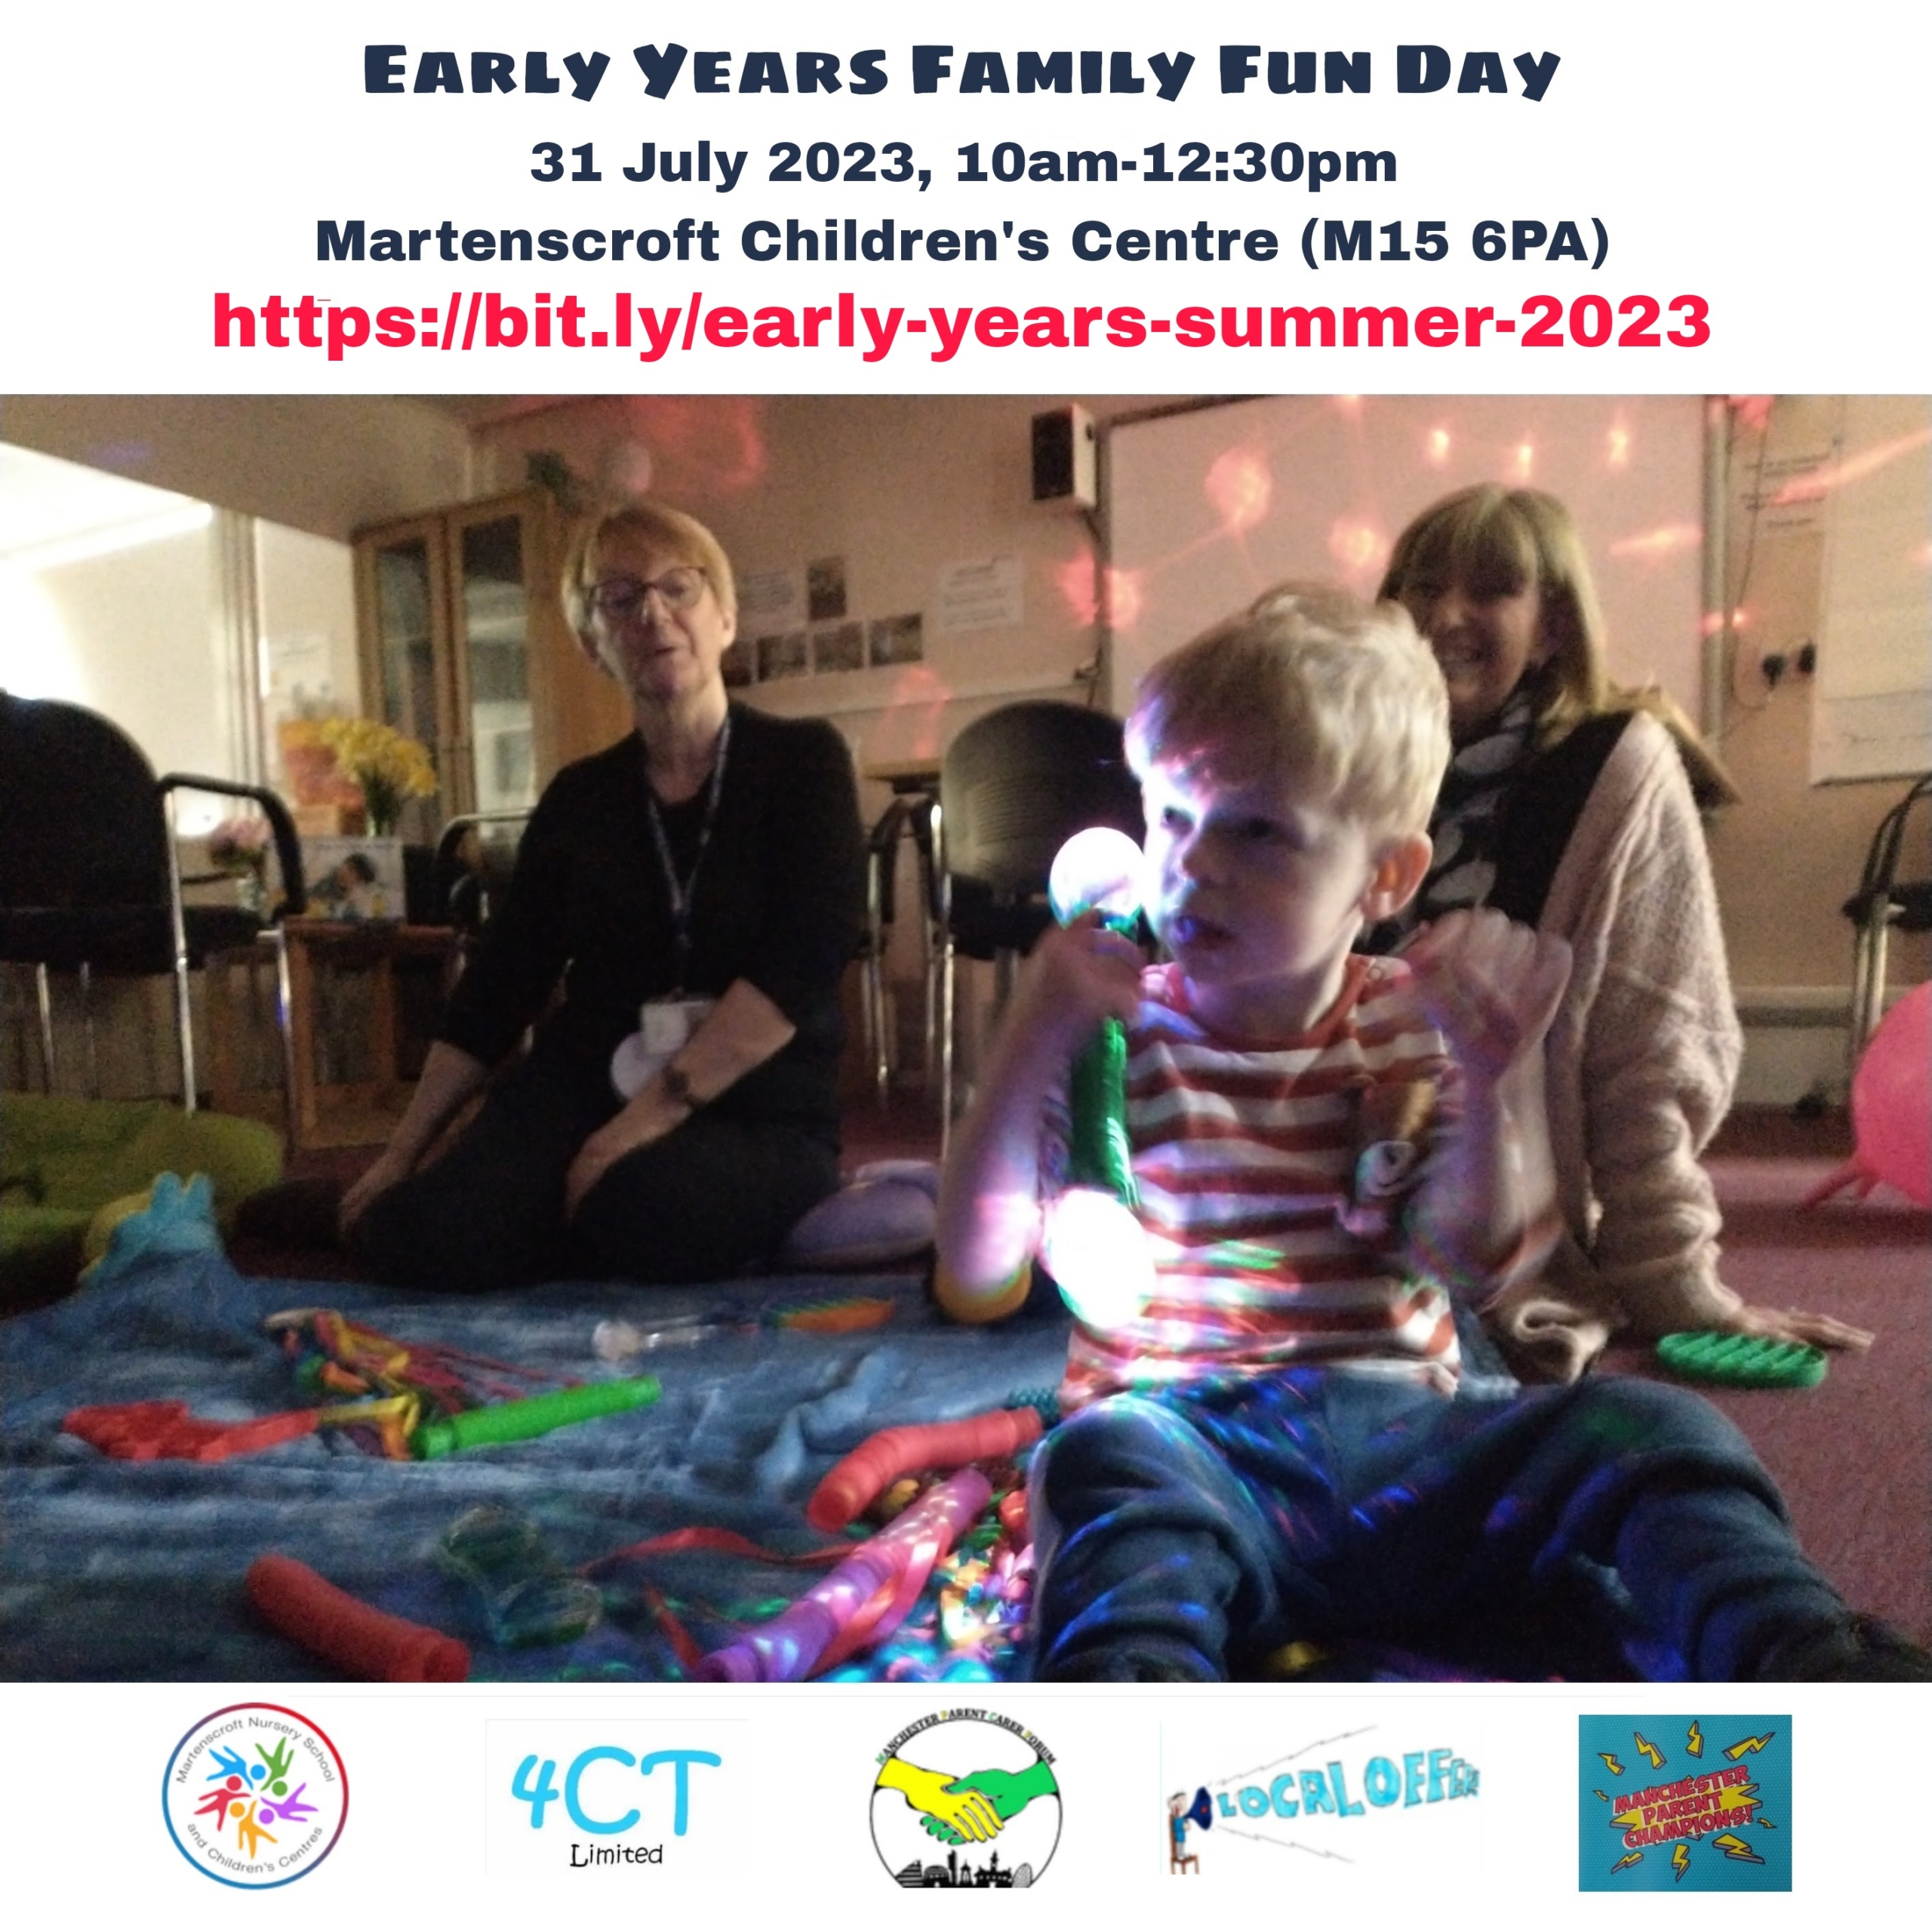 The main photo shows a child enjoying some time in a pop-up sensory room, while being watched by two adults. Above it are the details for MPCF's Early Years Family Fun Day, while below it are the logos of Martenscroft, 4CT, MPCF, Local Offer, and the Parent Champions, respectively.